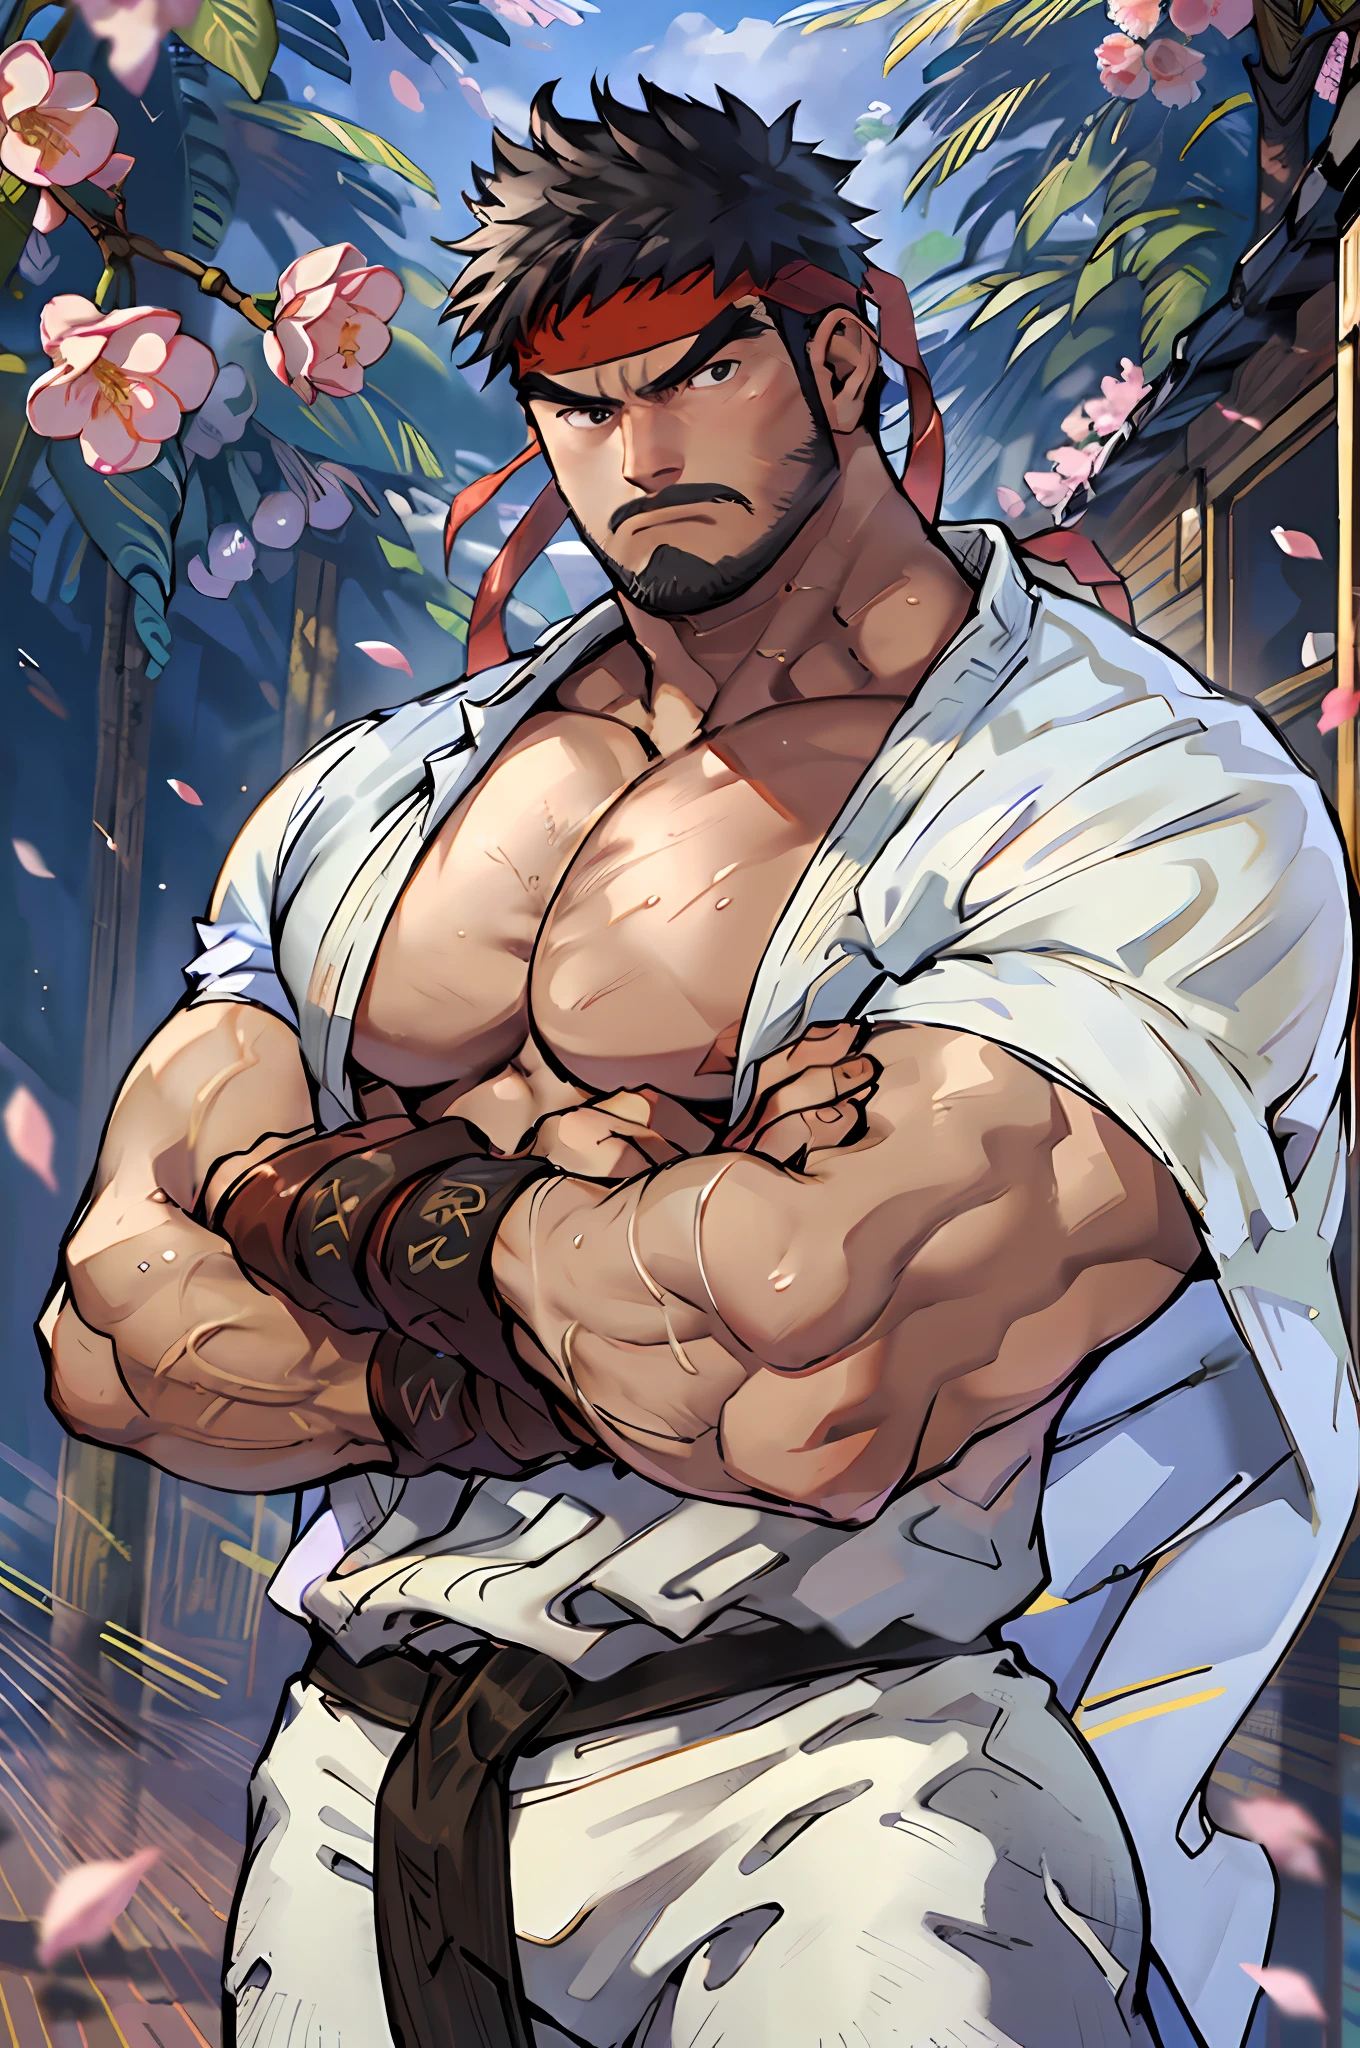 (masterpiece, best quality:1.2), cowboy shot, solo, male focus, 1boy, ryu \(sf\), middle age, serious, determined face, white skin, looking at viewer, black hair, black beard, detailed face tall, hunk, muscular, wide shoulder, big physique, wearing big white Dougi, new white Dougi shirt, white Dougi pant, red headband, fingerless gloves, blue aura, cherry blossom in the background, high detailed, crossed arms